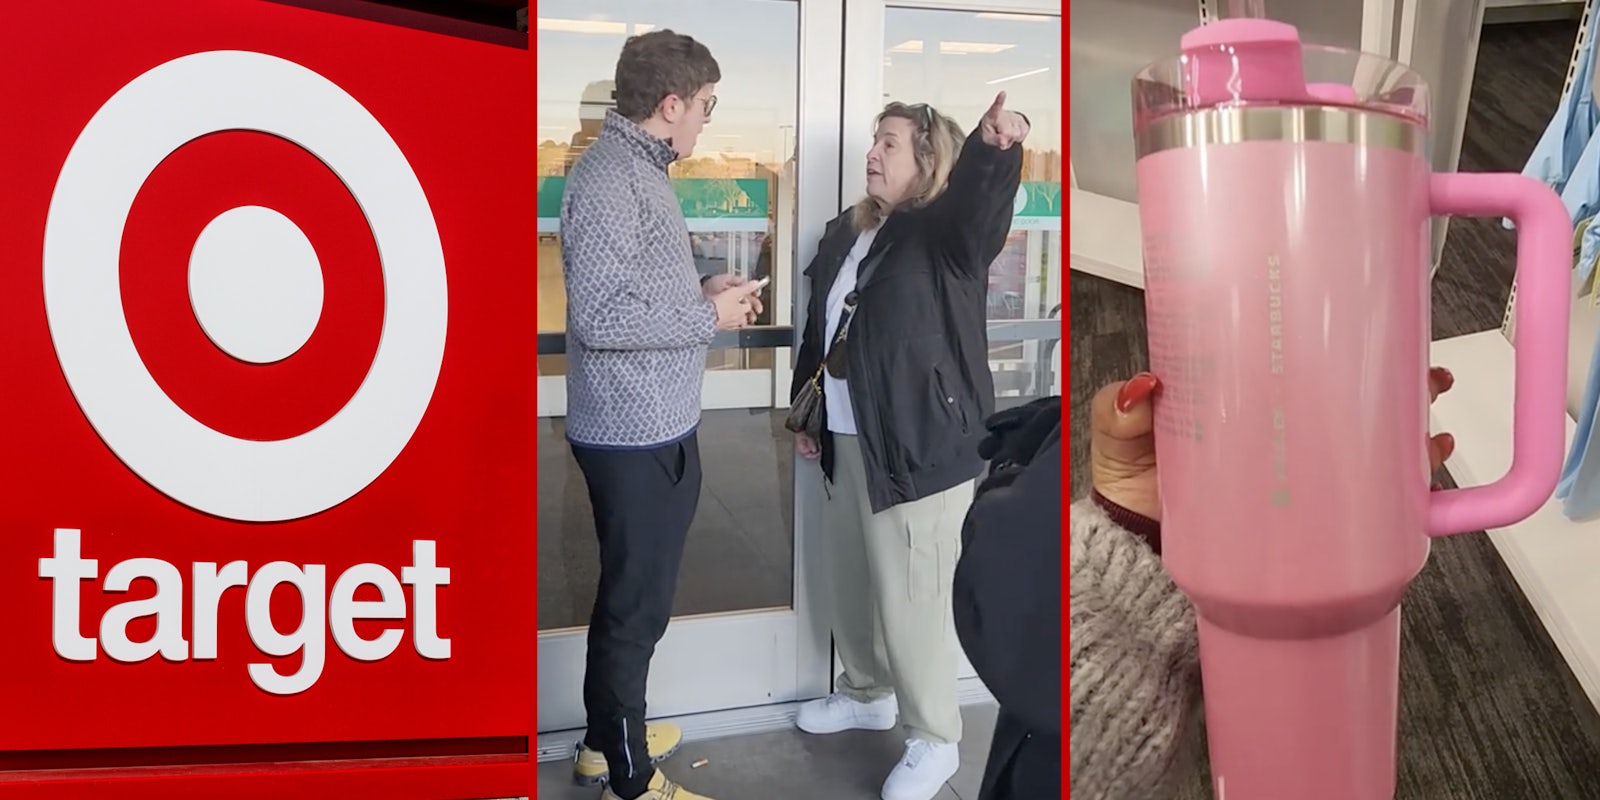 Target sign(l), Two people fighting(c), Pink stanley cup(r)